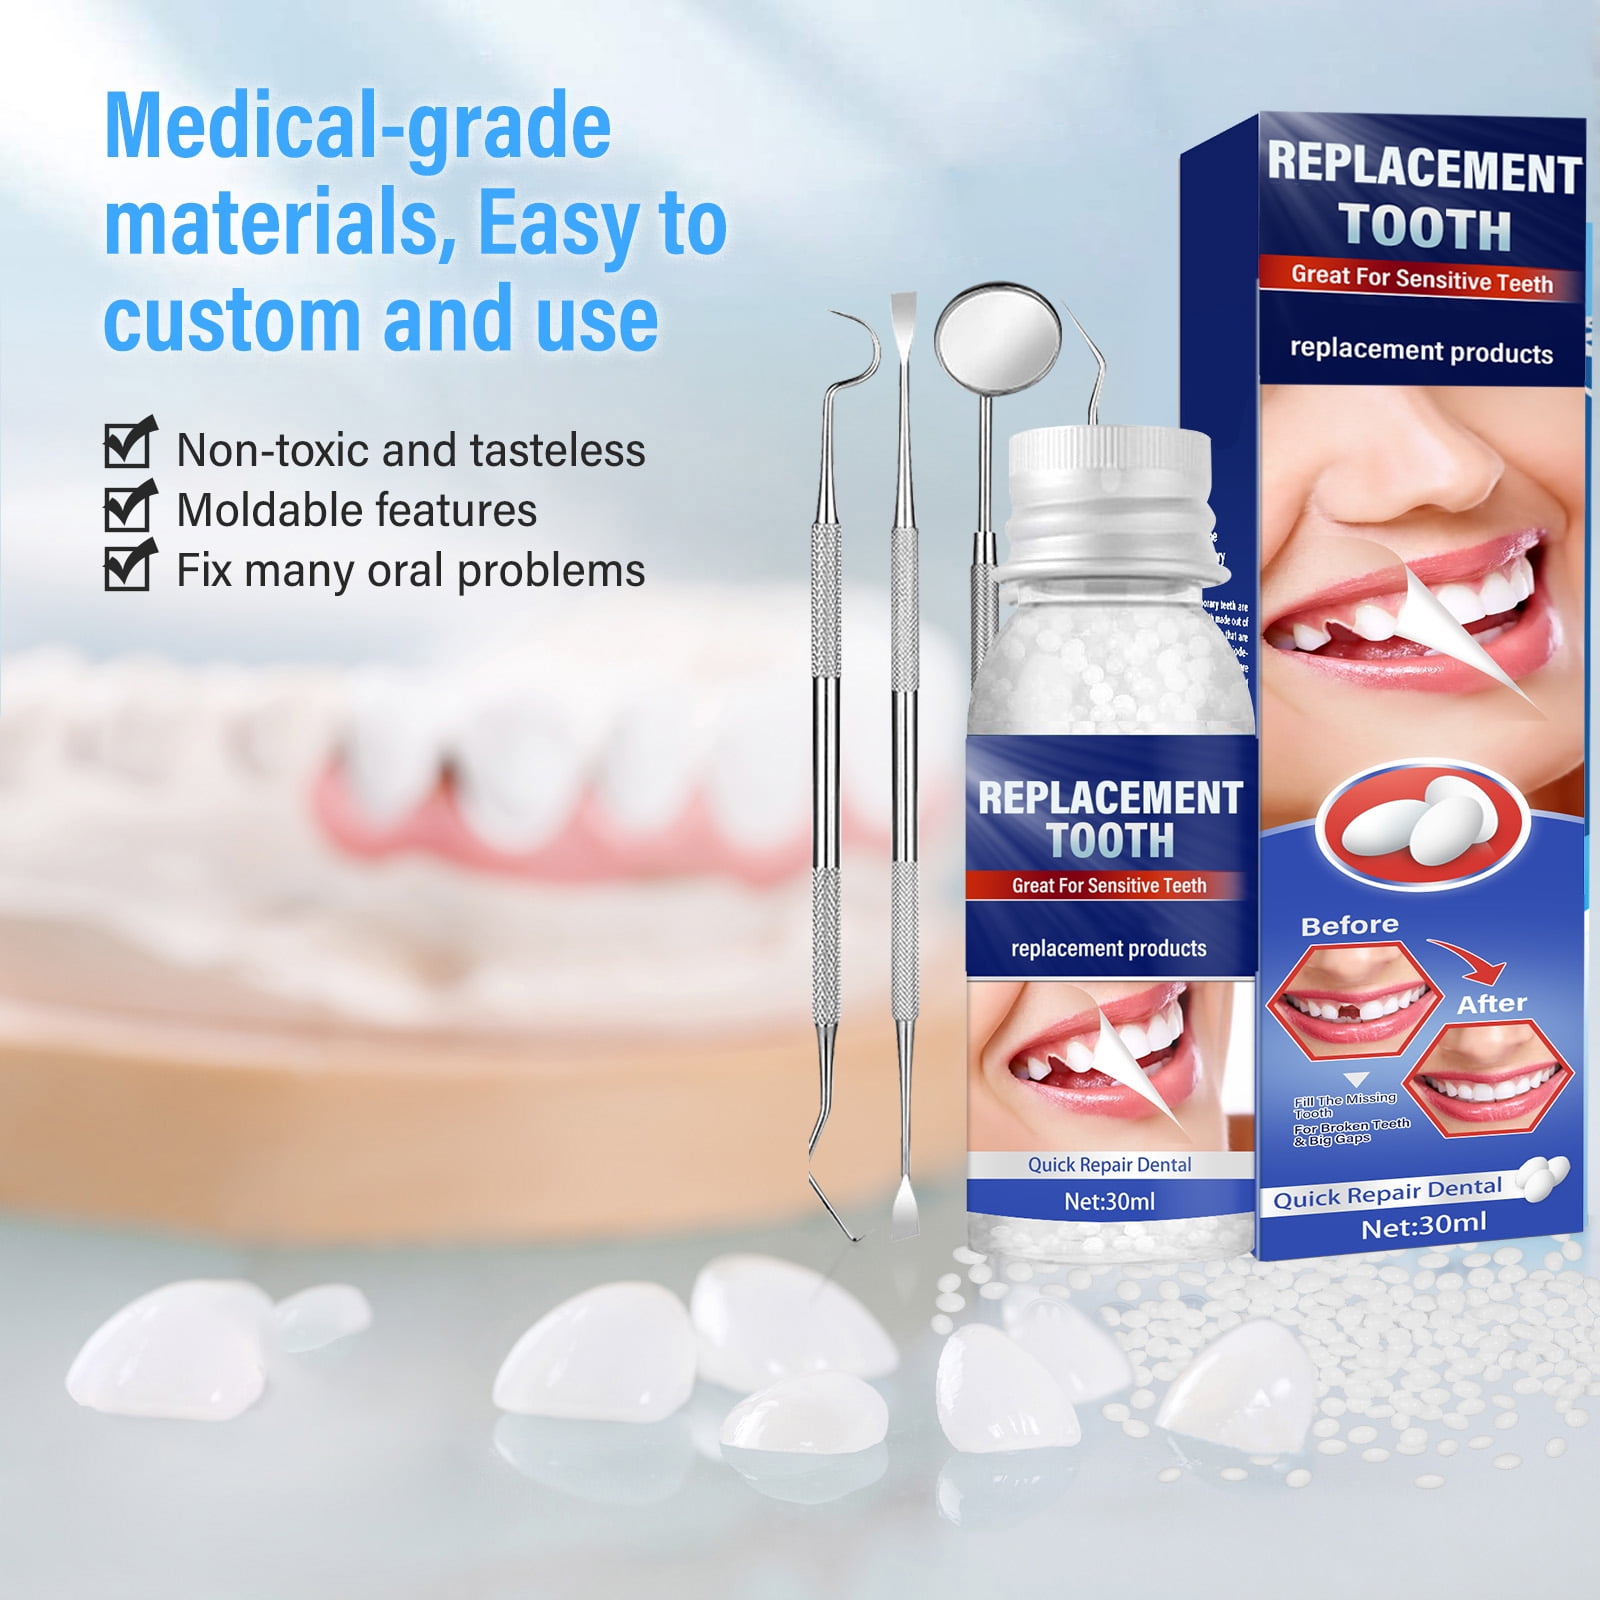 CLEARFIL REPAIR  a kit for the repair of tooth related fractures